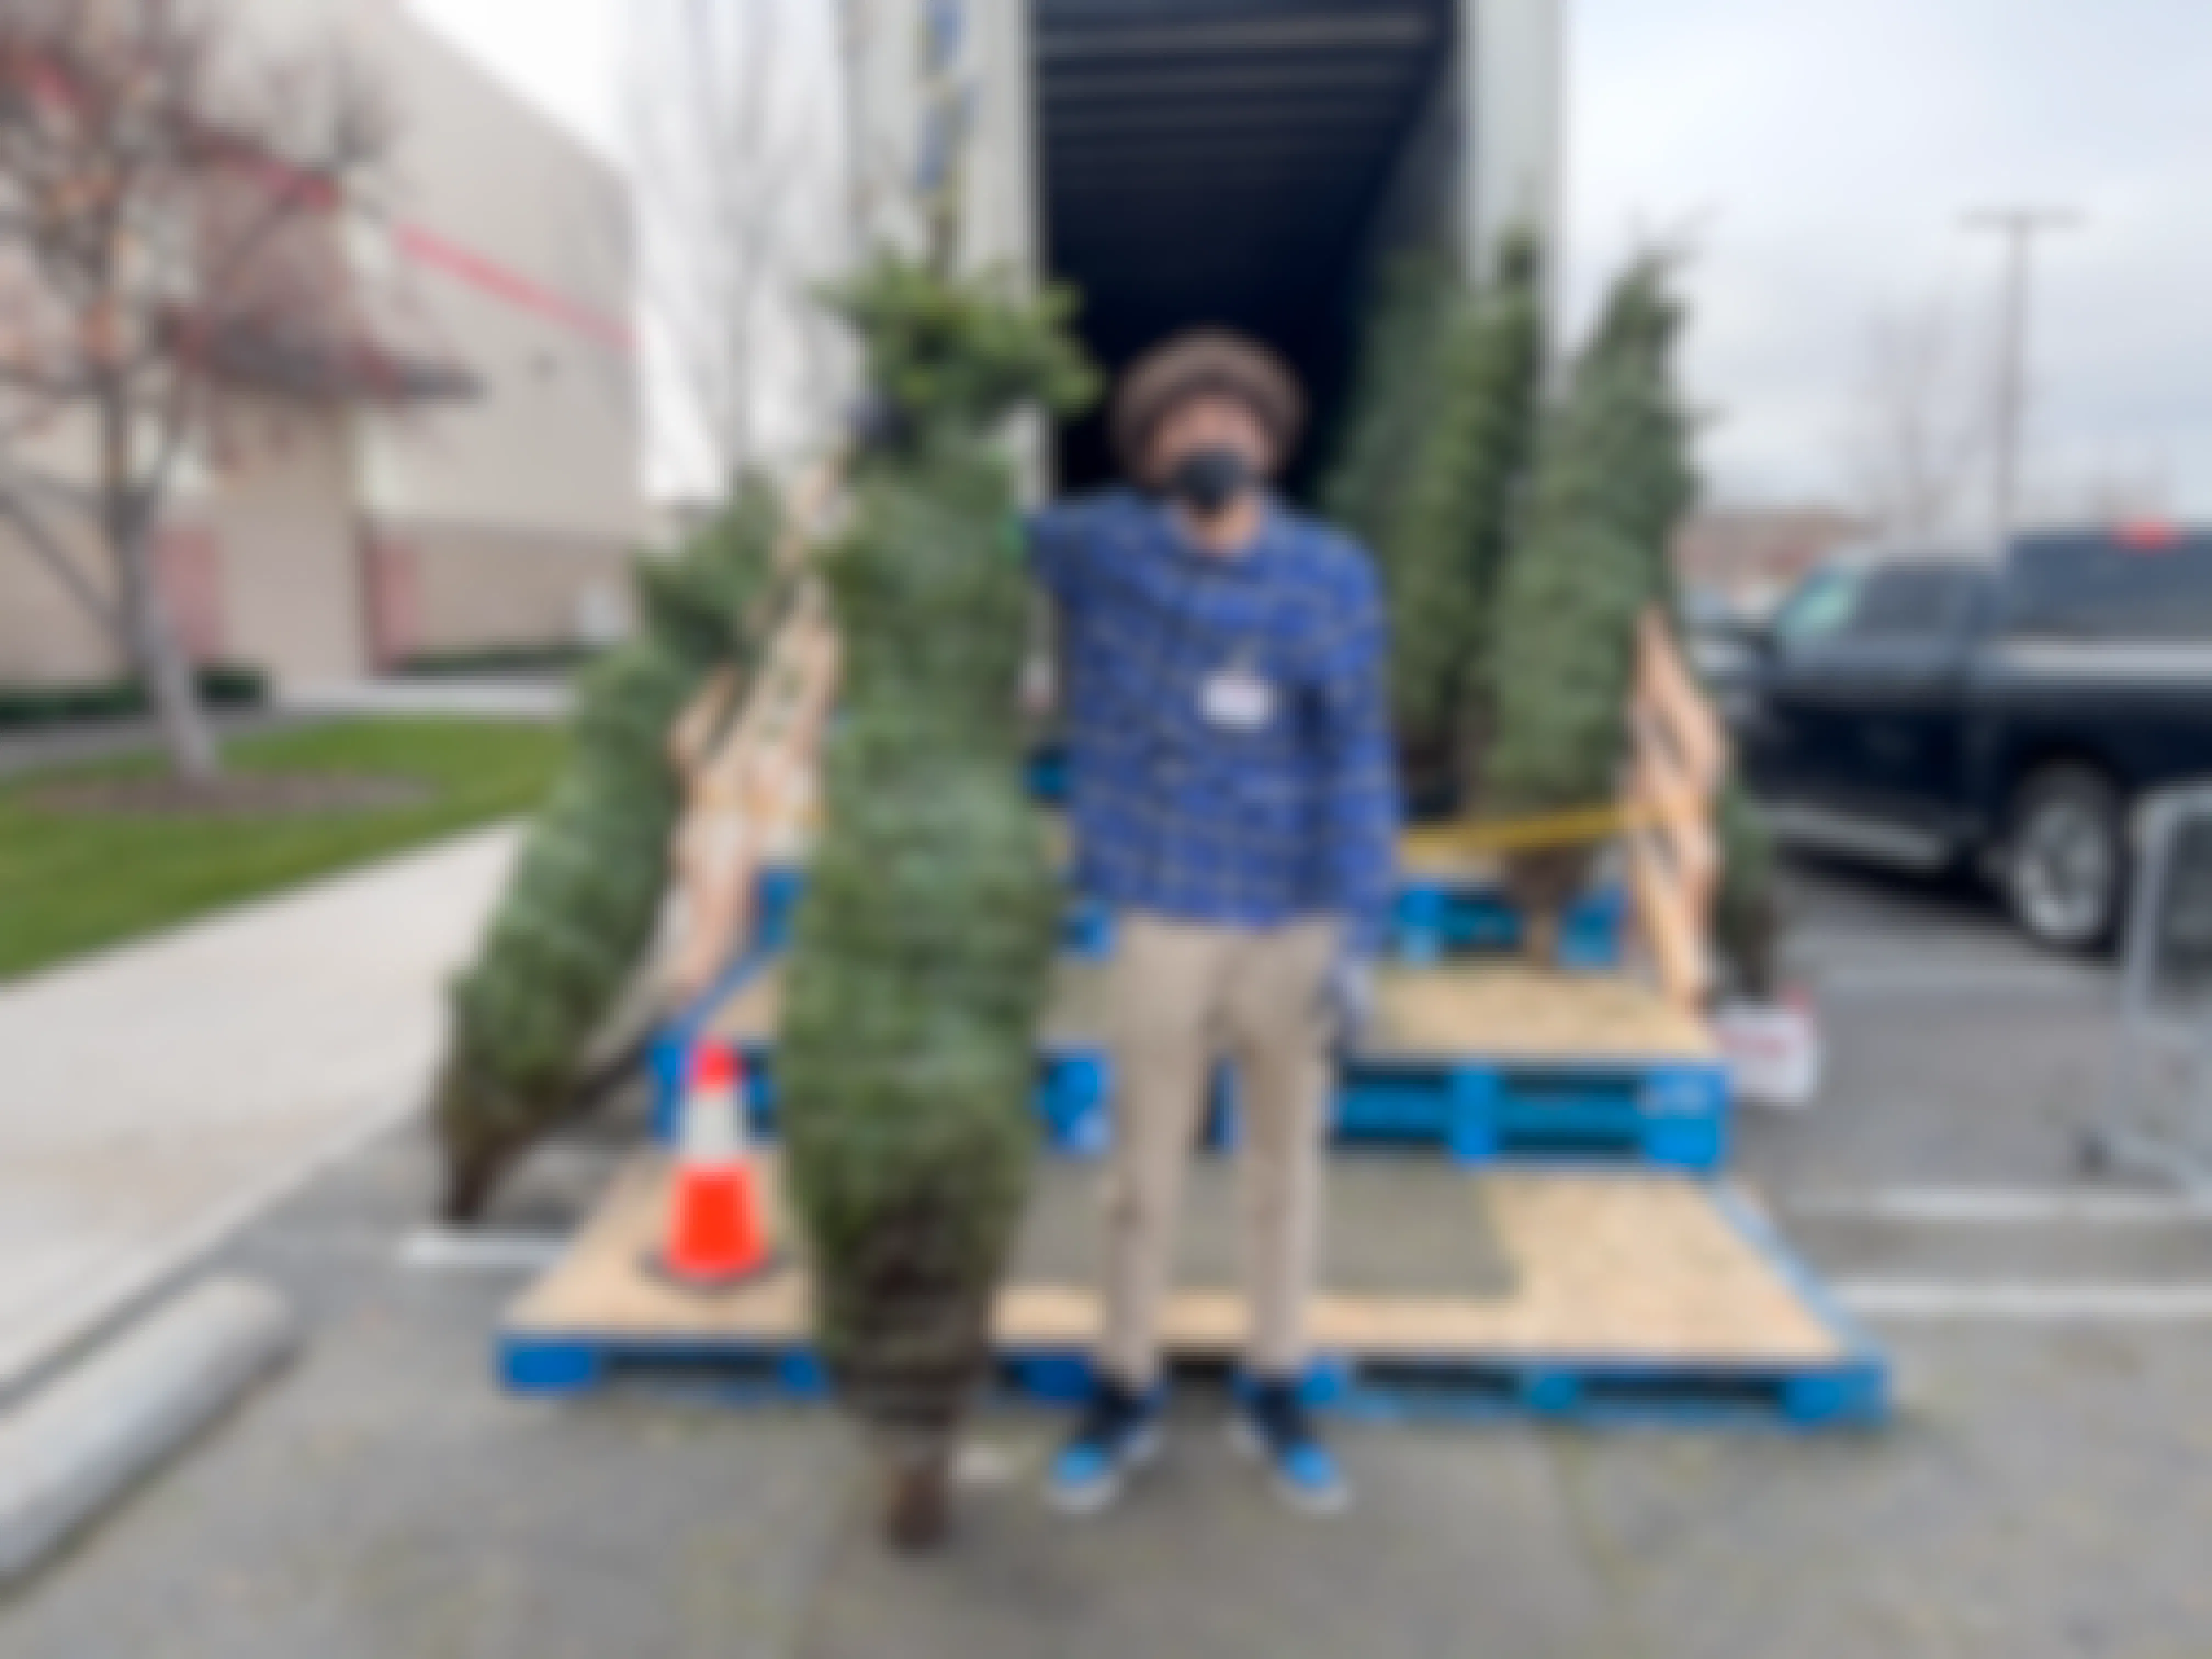 A Costco employee holding up a fresh cut Christmas tree